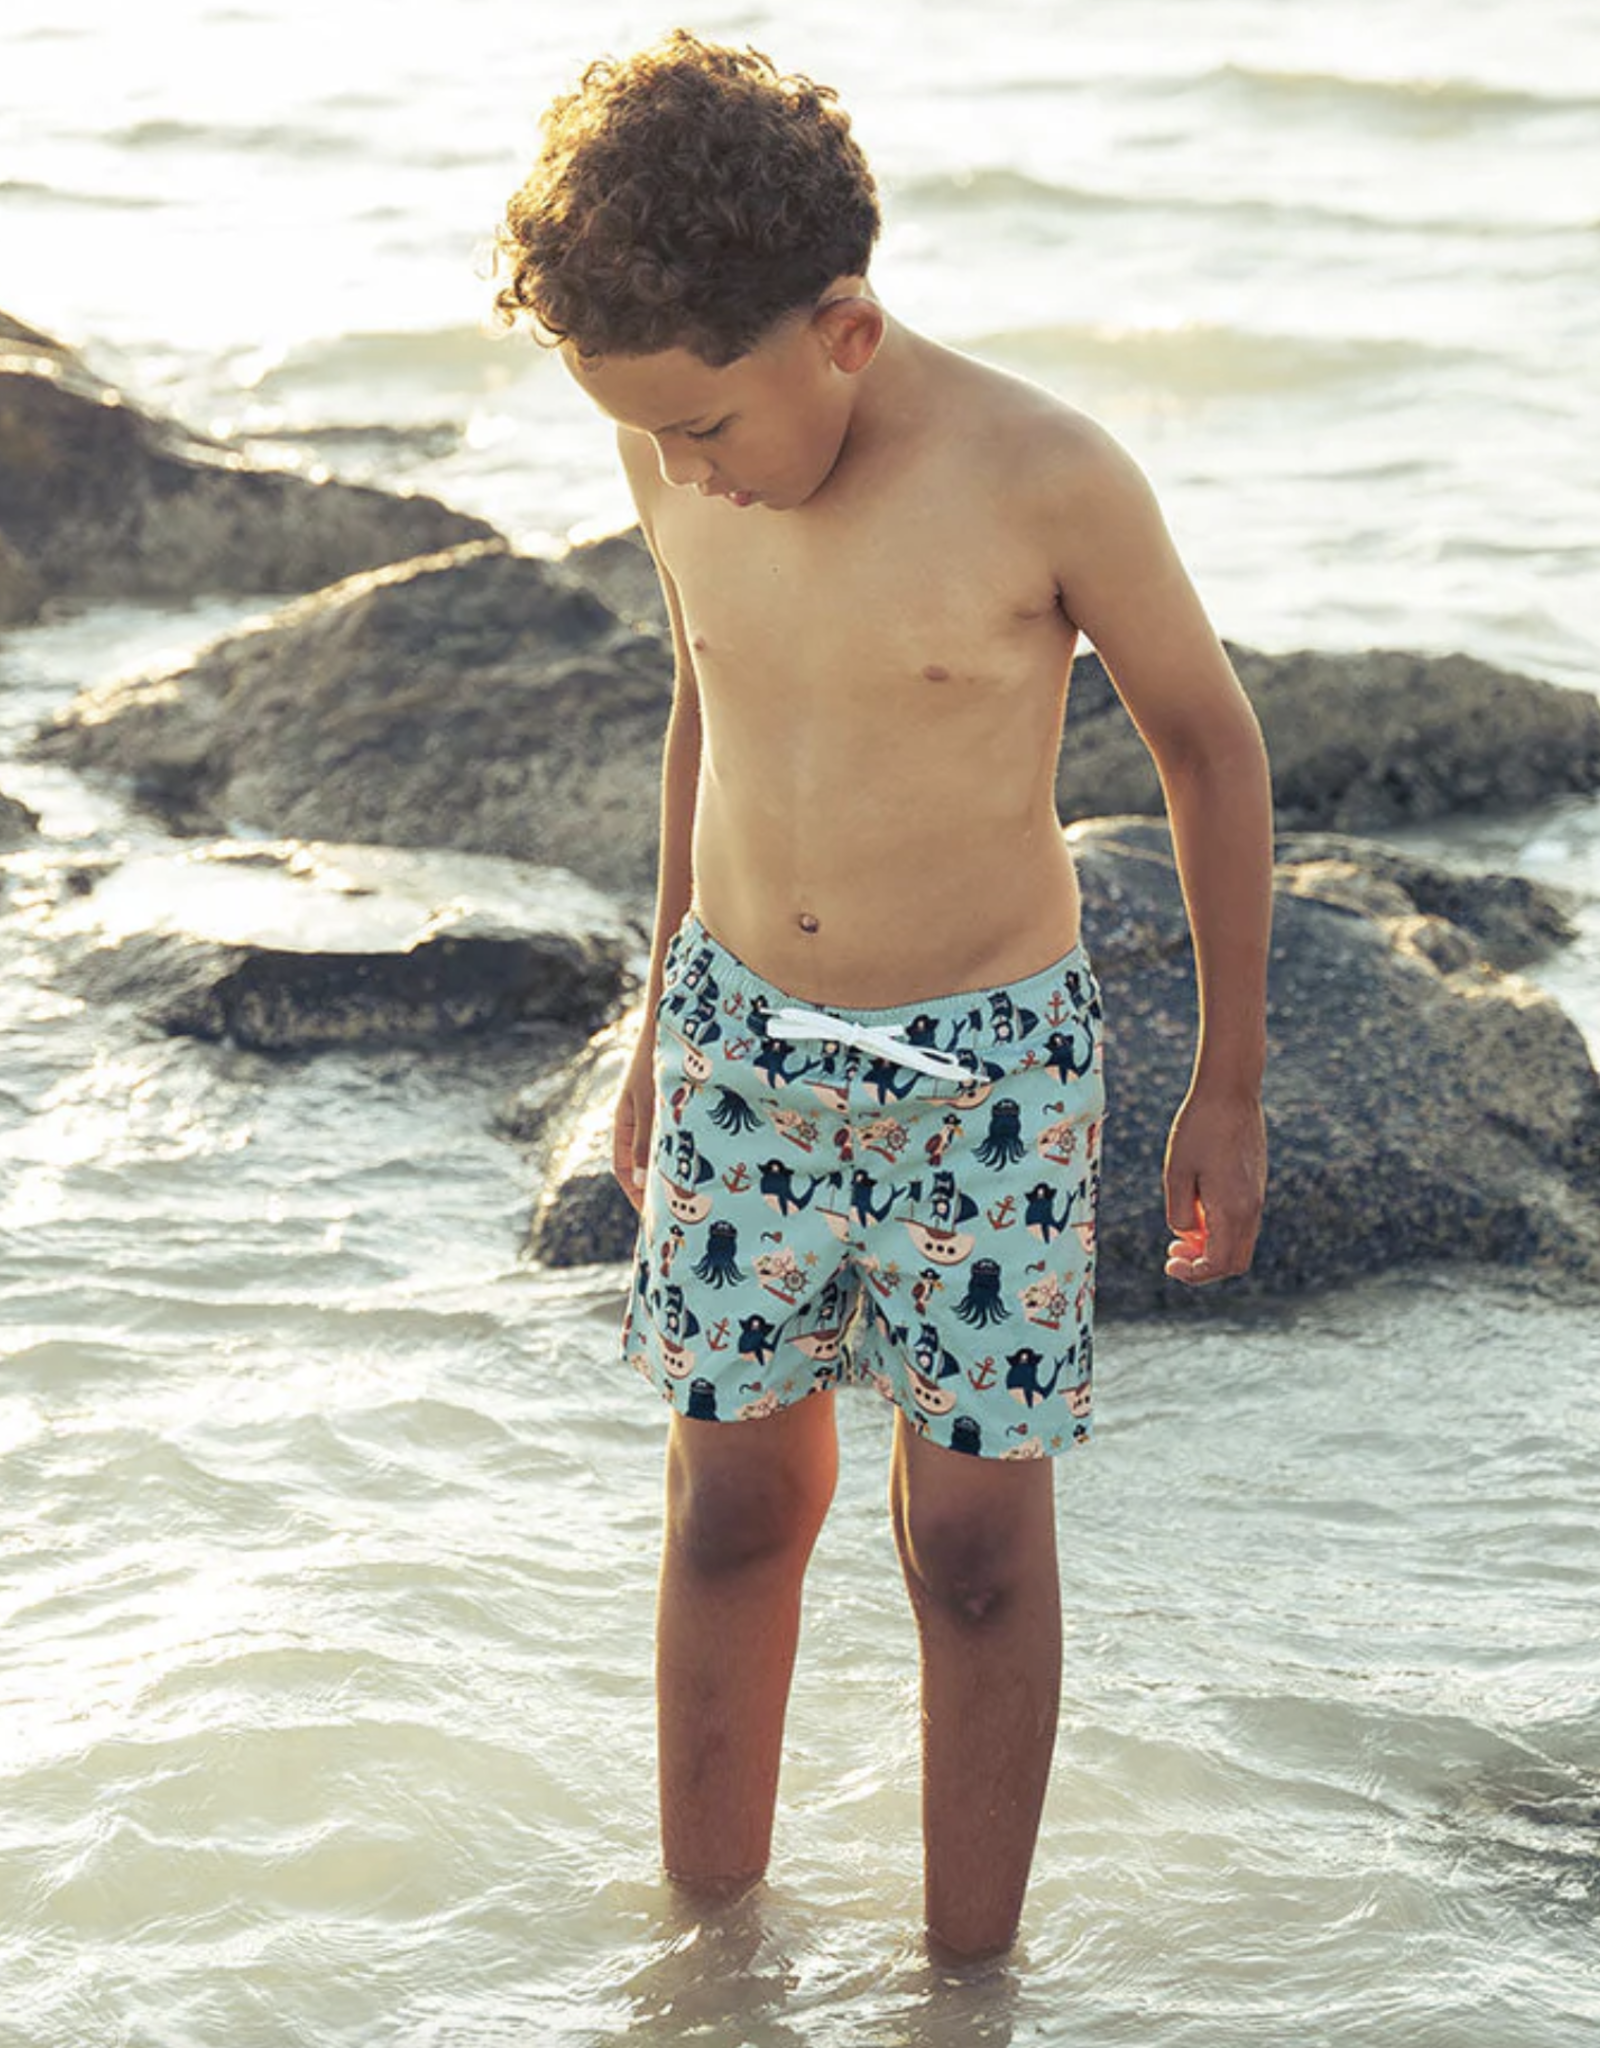 Emerson and Friends Pirate's Life Swim Trunks